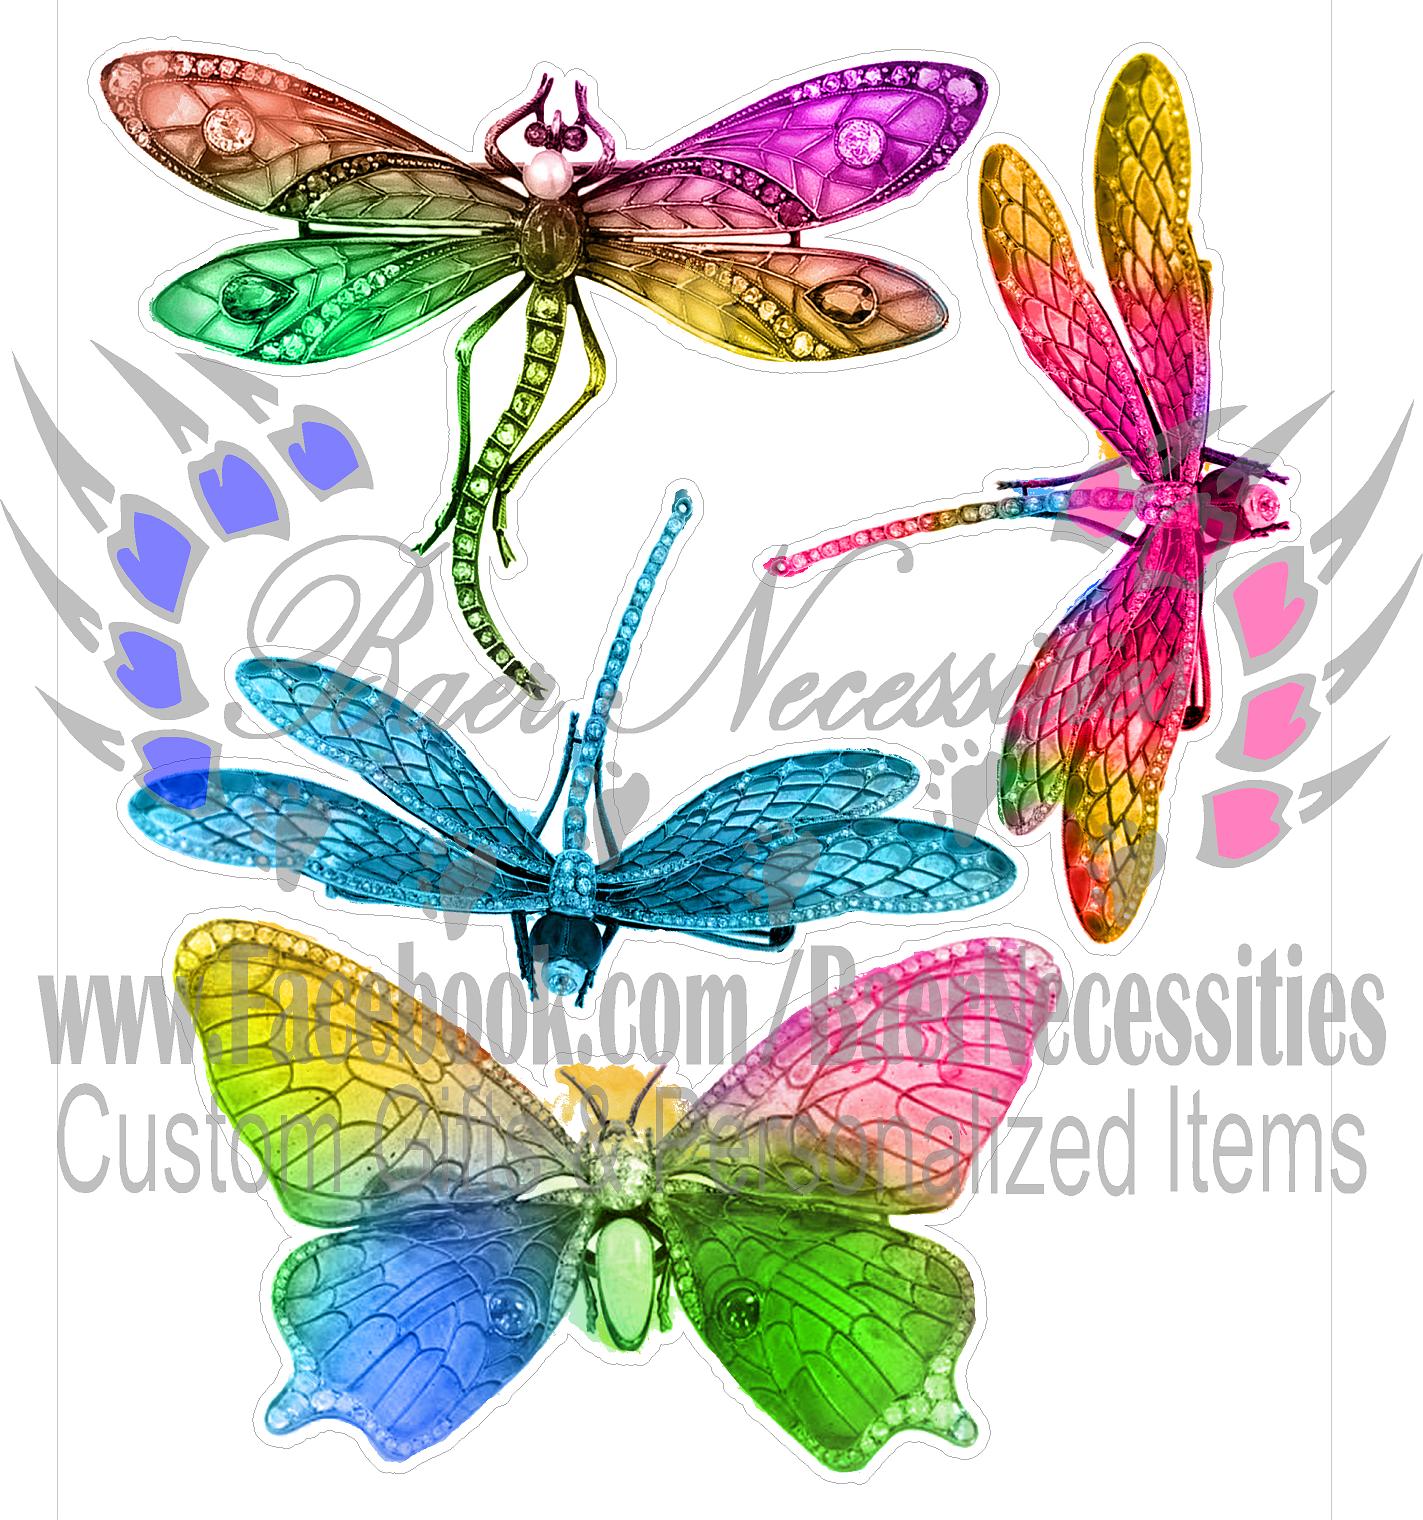 Watercolor Butterfly & Dragonfies Sheet - Decal Theme/Set